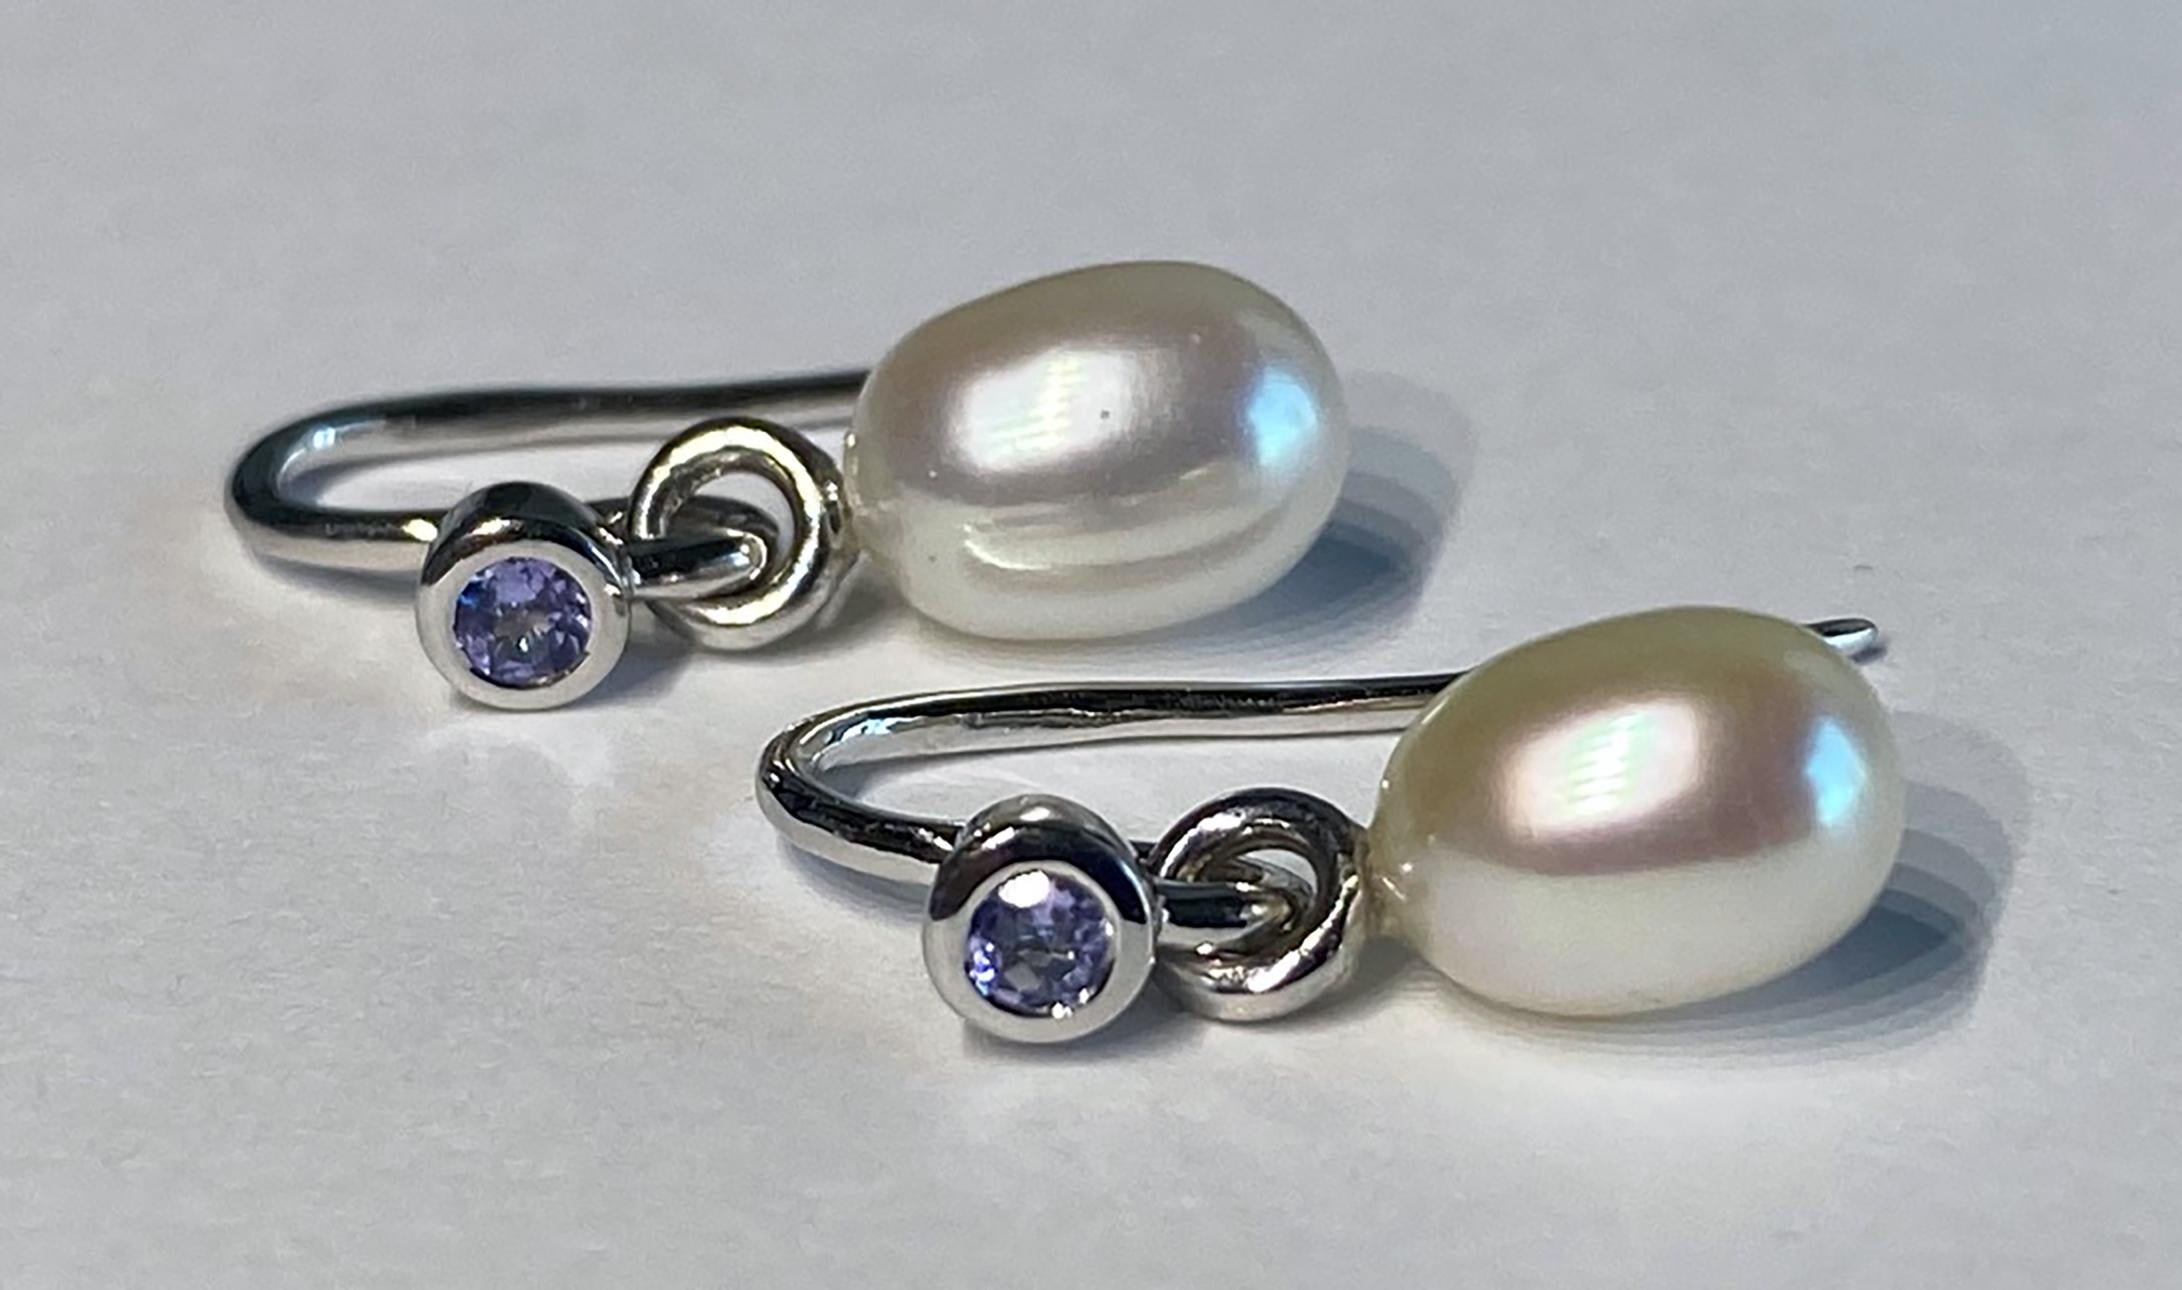 14kt White Gold & Silver Earrings, set with Tanzanite and Freshwater Pearls on a French Hook. The pearls dangle  from a hoop. 

Originally from San Diego, California, Kary Adam lived in the “Gem Capital of the World” - Bangkok, Thailand, sourcing